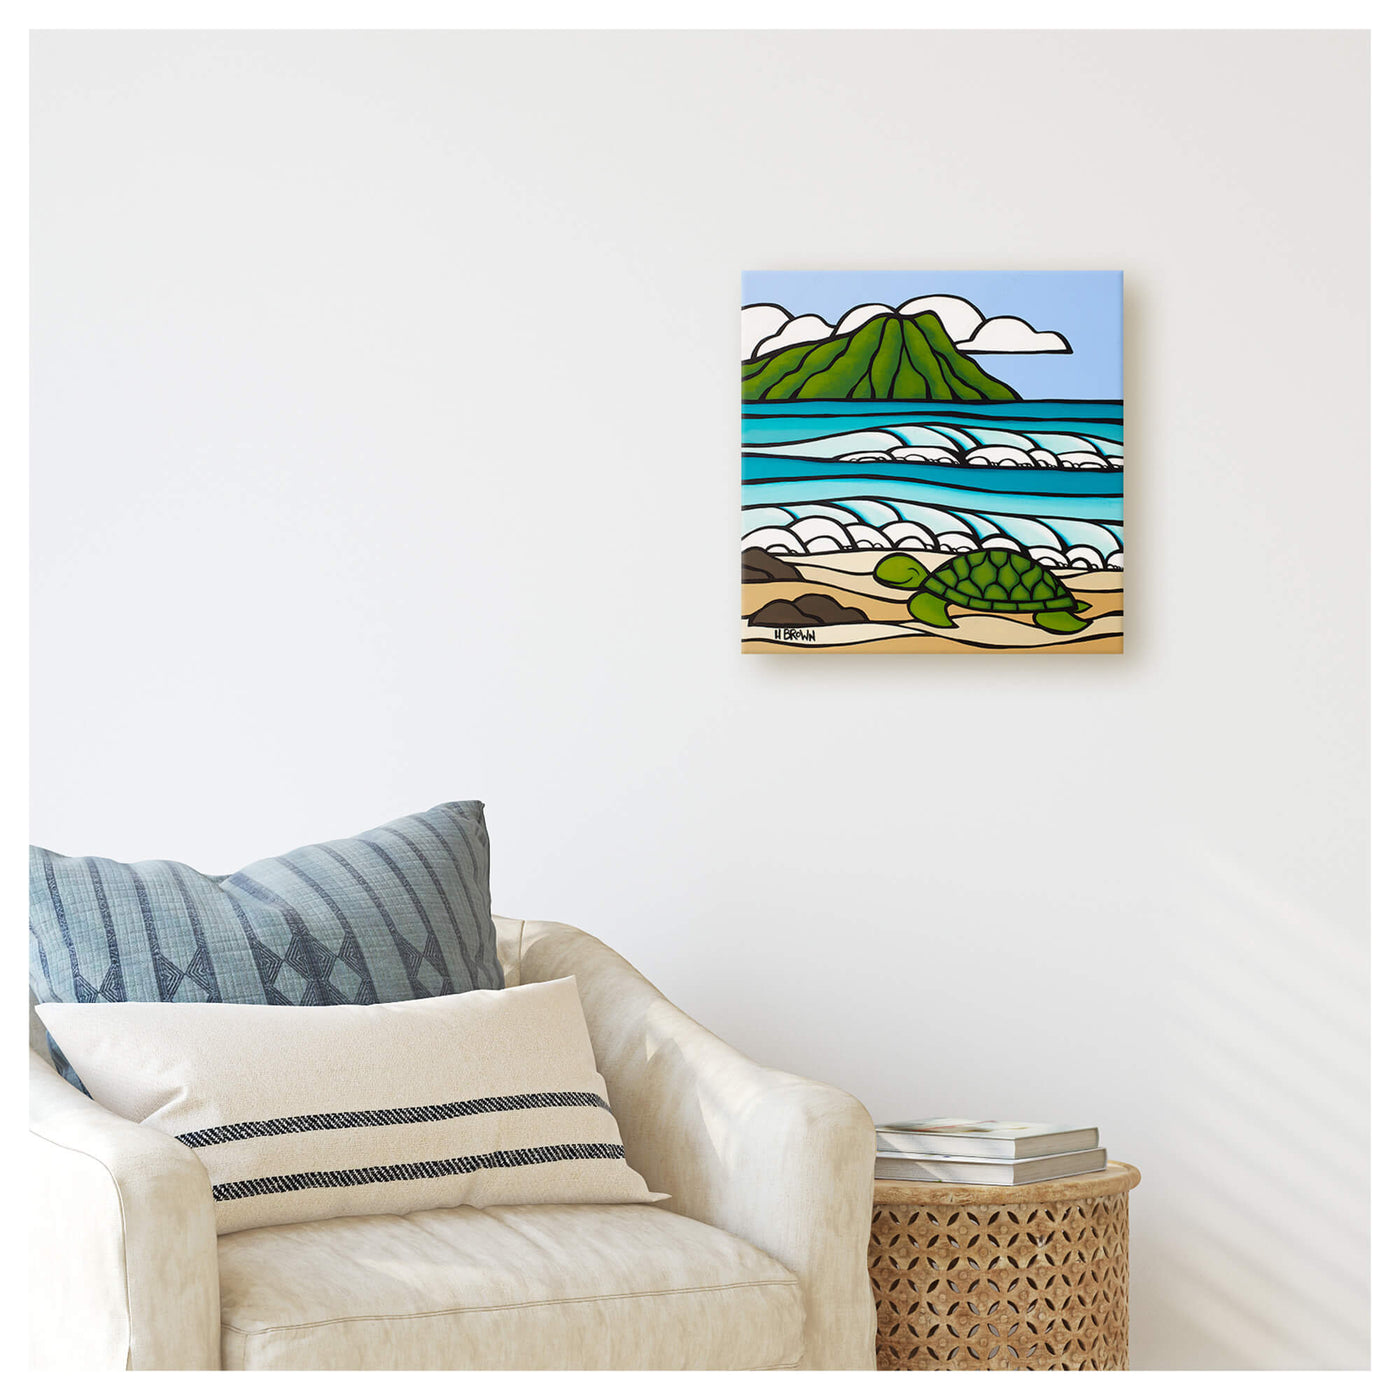 A canvas giclée print featuring a smiling turtle with some rolling waves and the famous Diamond Head by Hawaii surf artist Heather brown